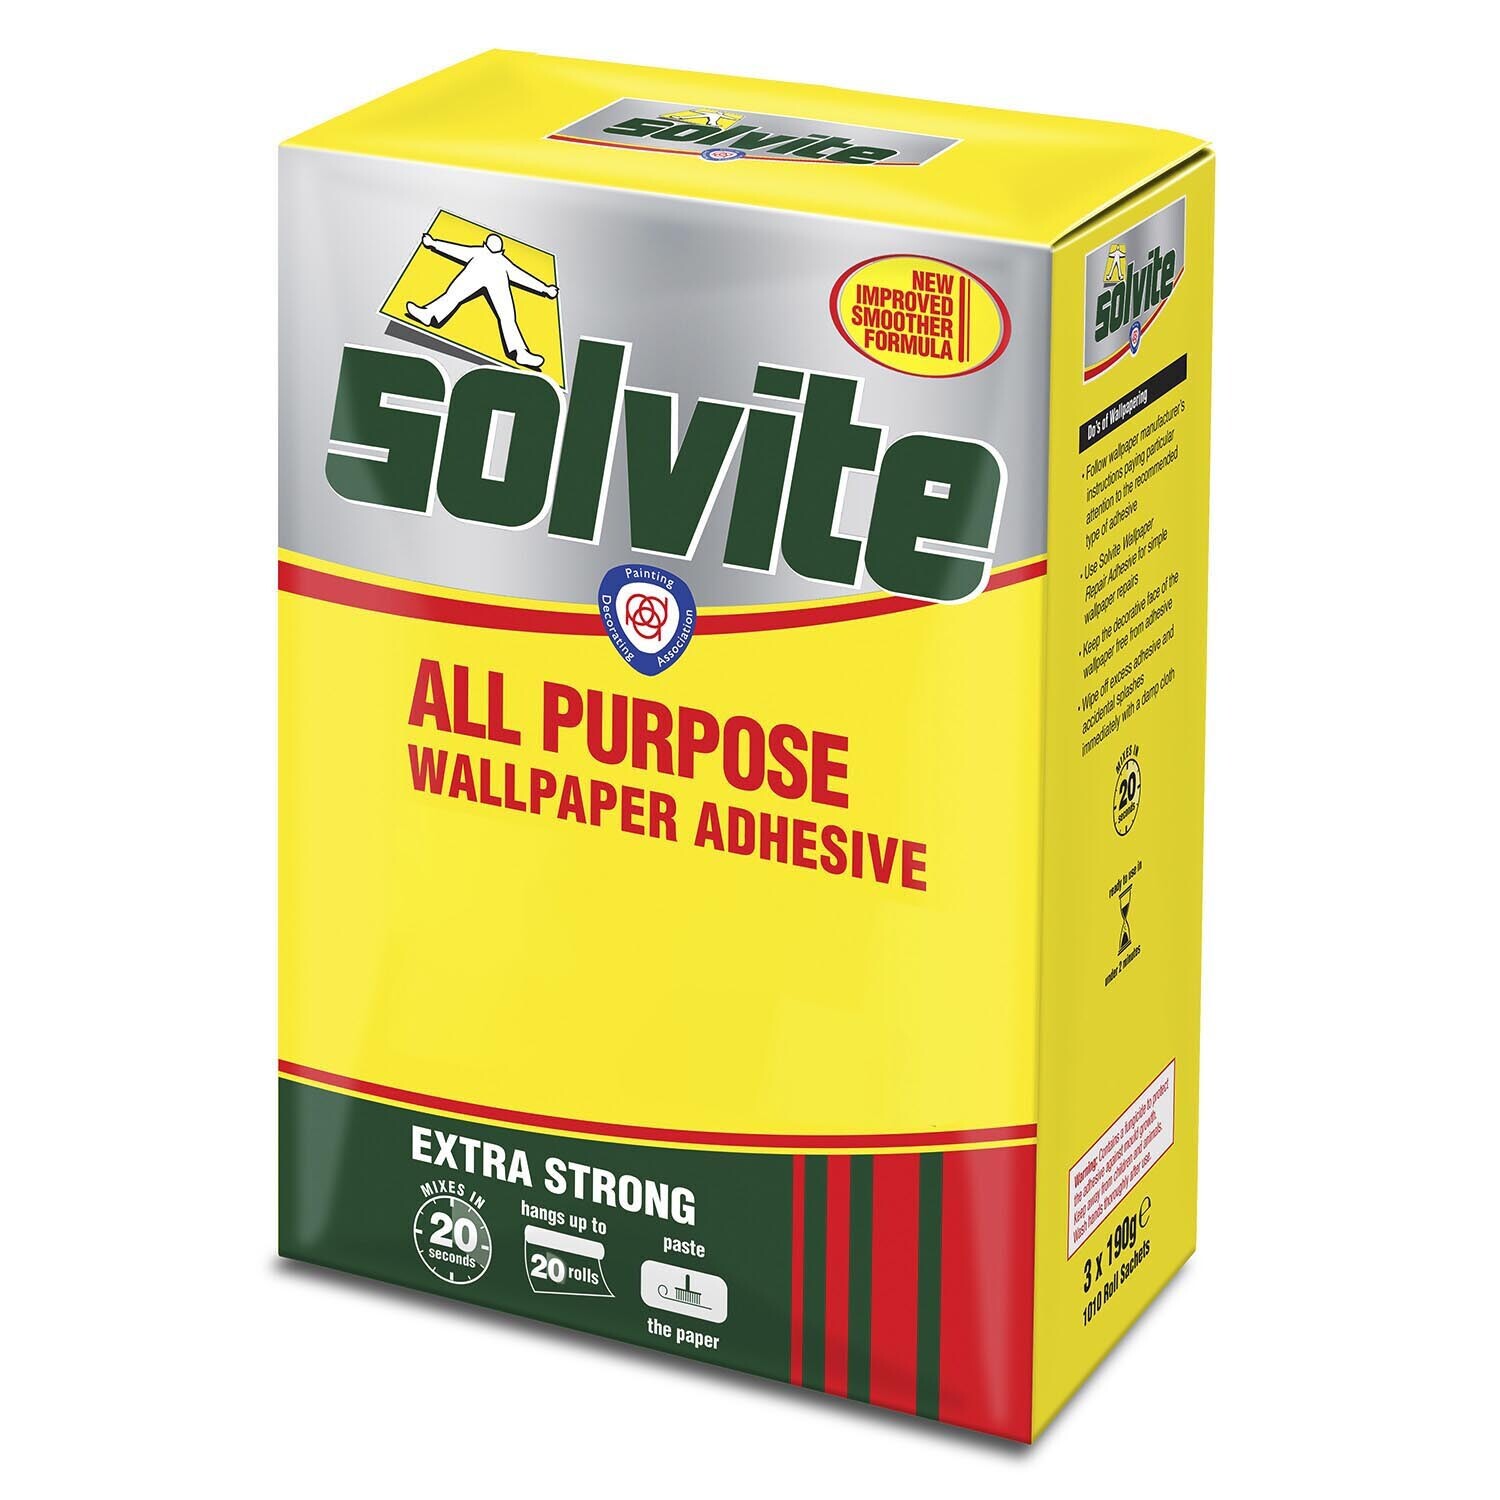 Solvite All Purpose Extra Strong Wallpaper Adhesive 20 Rolls Image